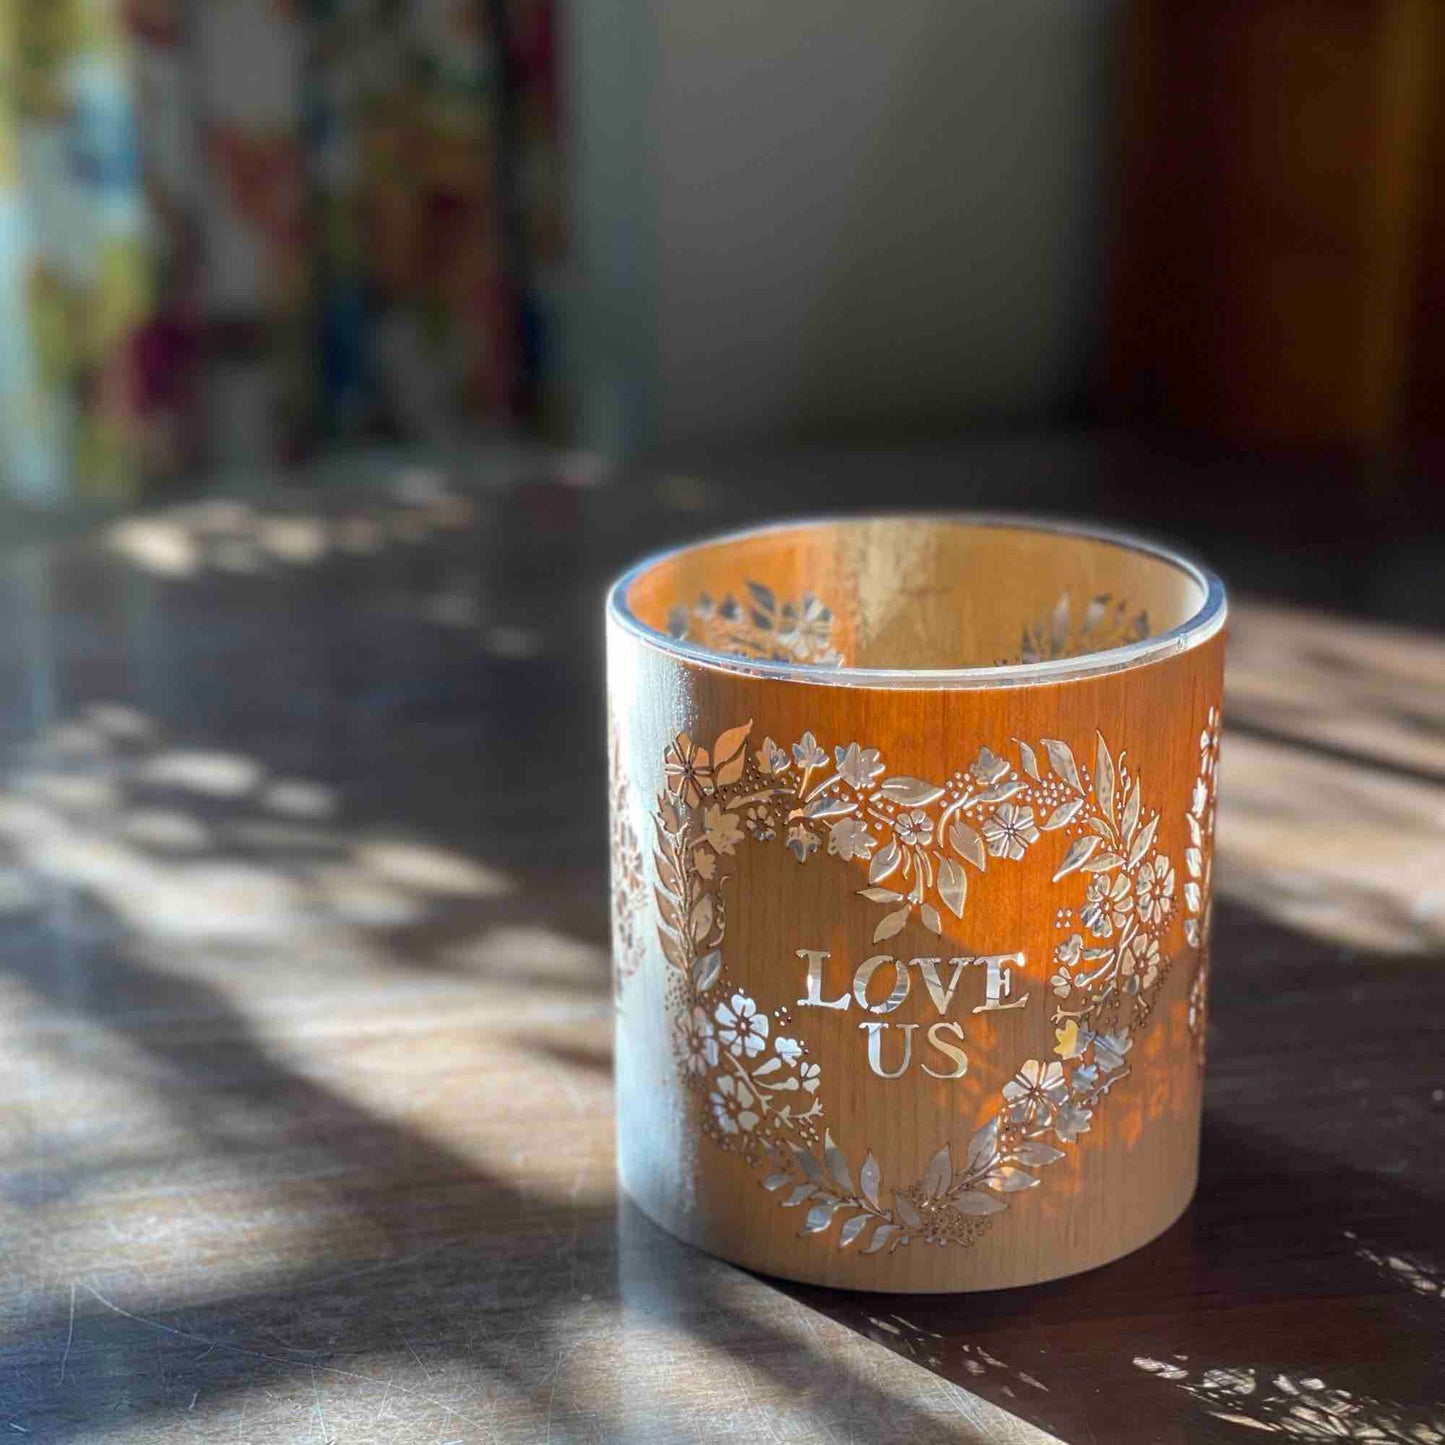 Fill Your Home With Love with our Love Us Lantern